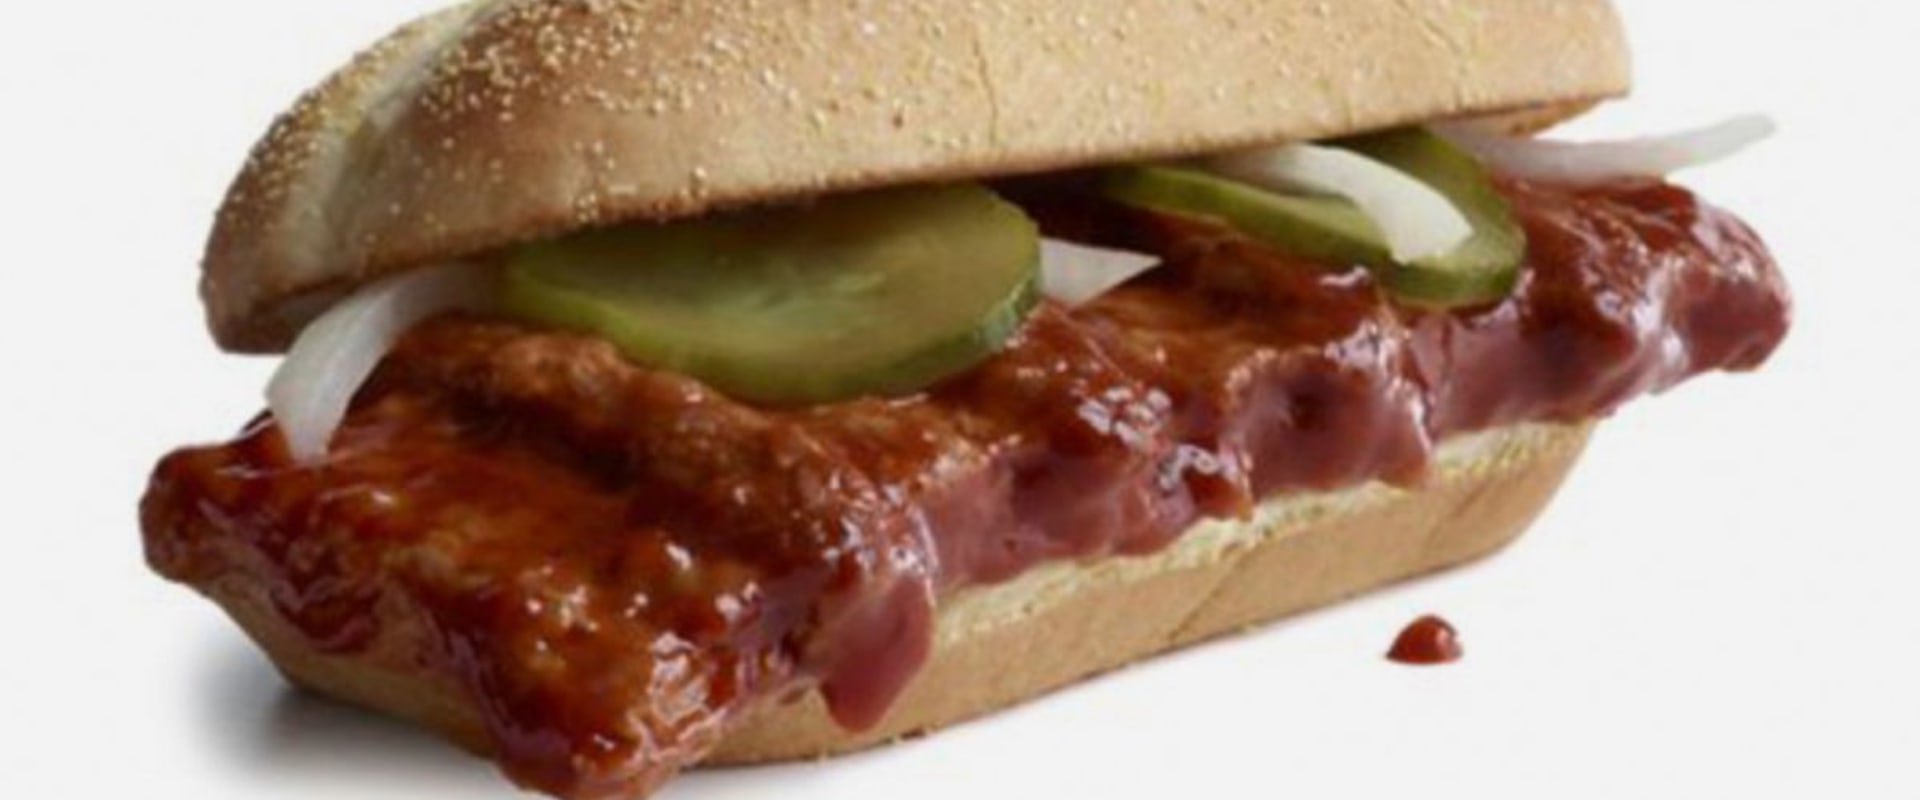 When is the McRib Coming Back in 2020?